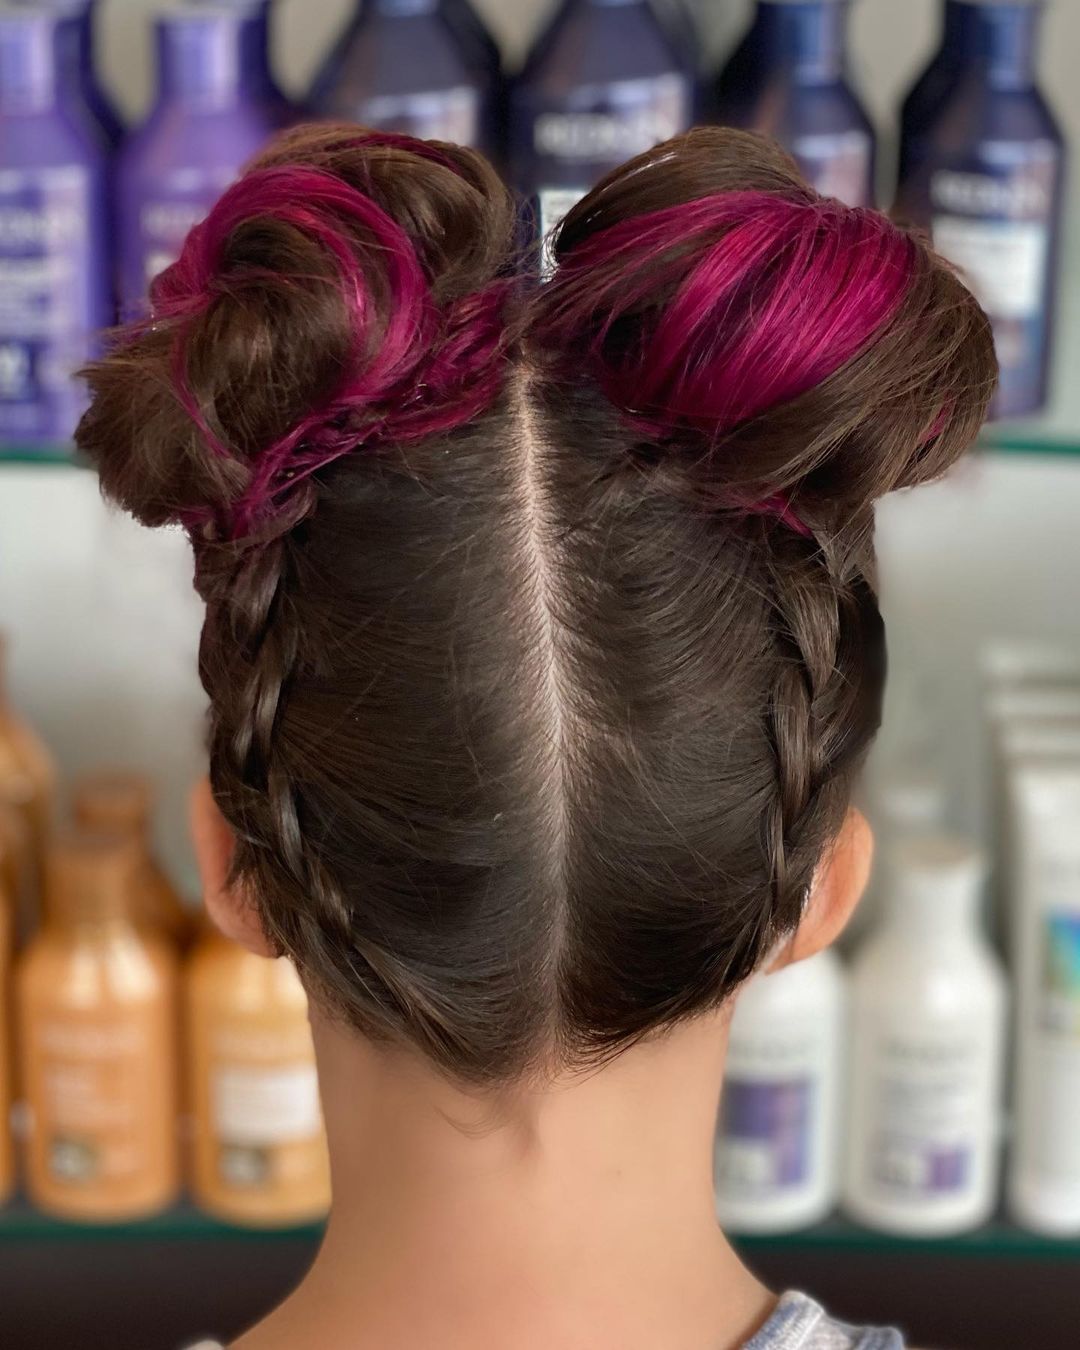 Dark Black Hair With Pink Highlights Space Buns